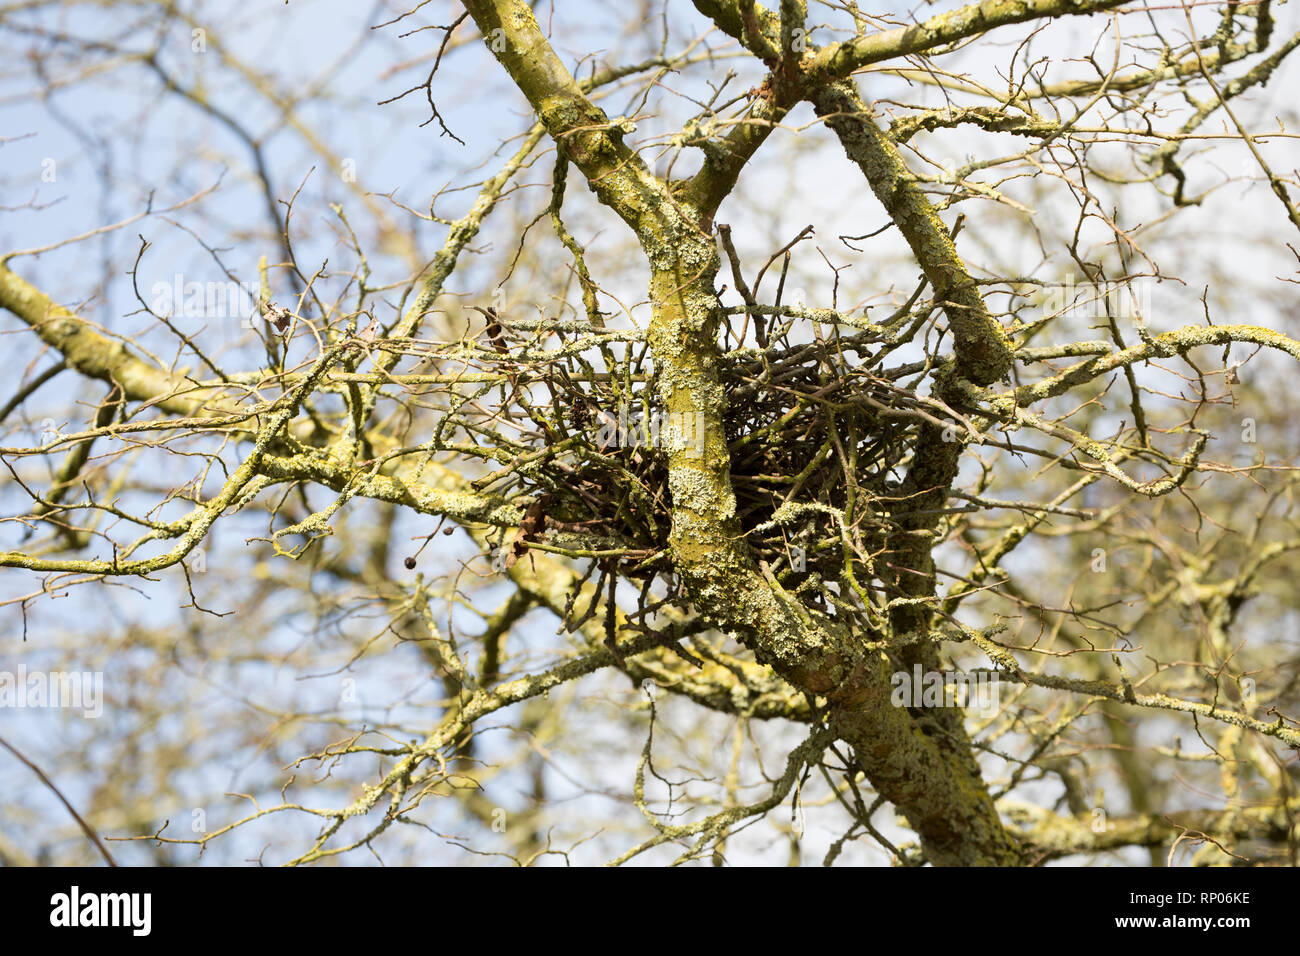 An empty woodpigeon nest in February close to housing. The woodpigeon, Columba palumbus, is one of the most common birds in the UK with a population n Stock Photo